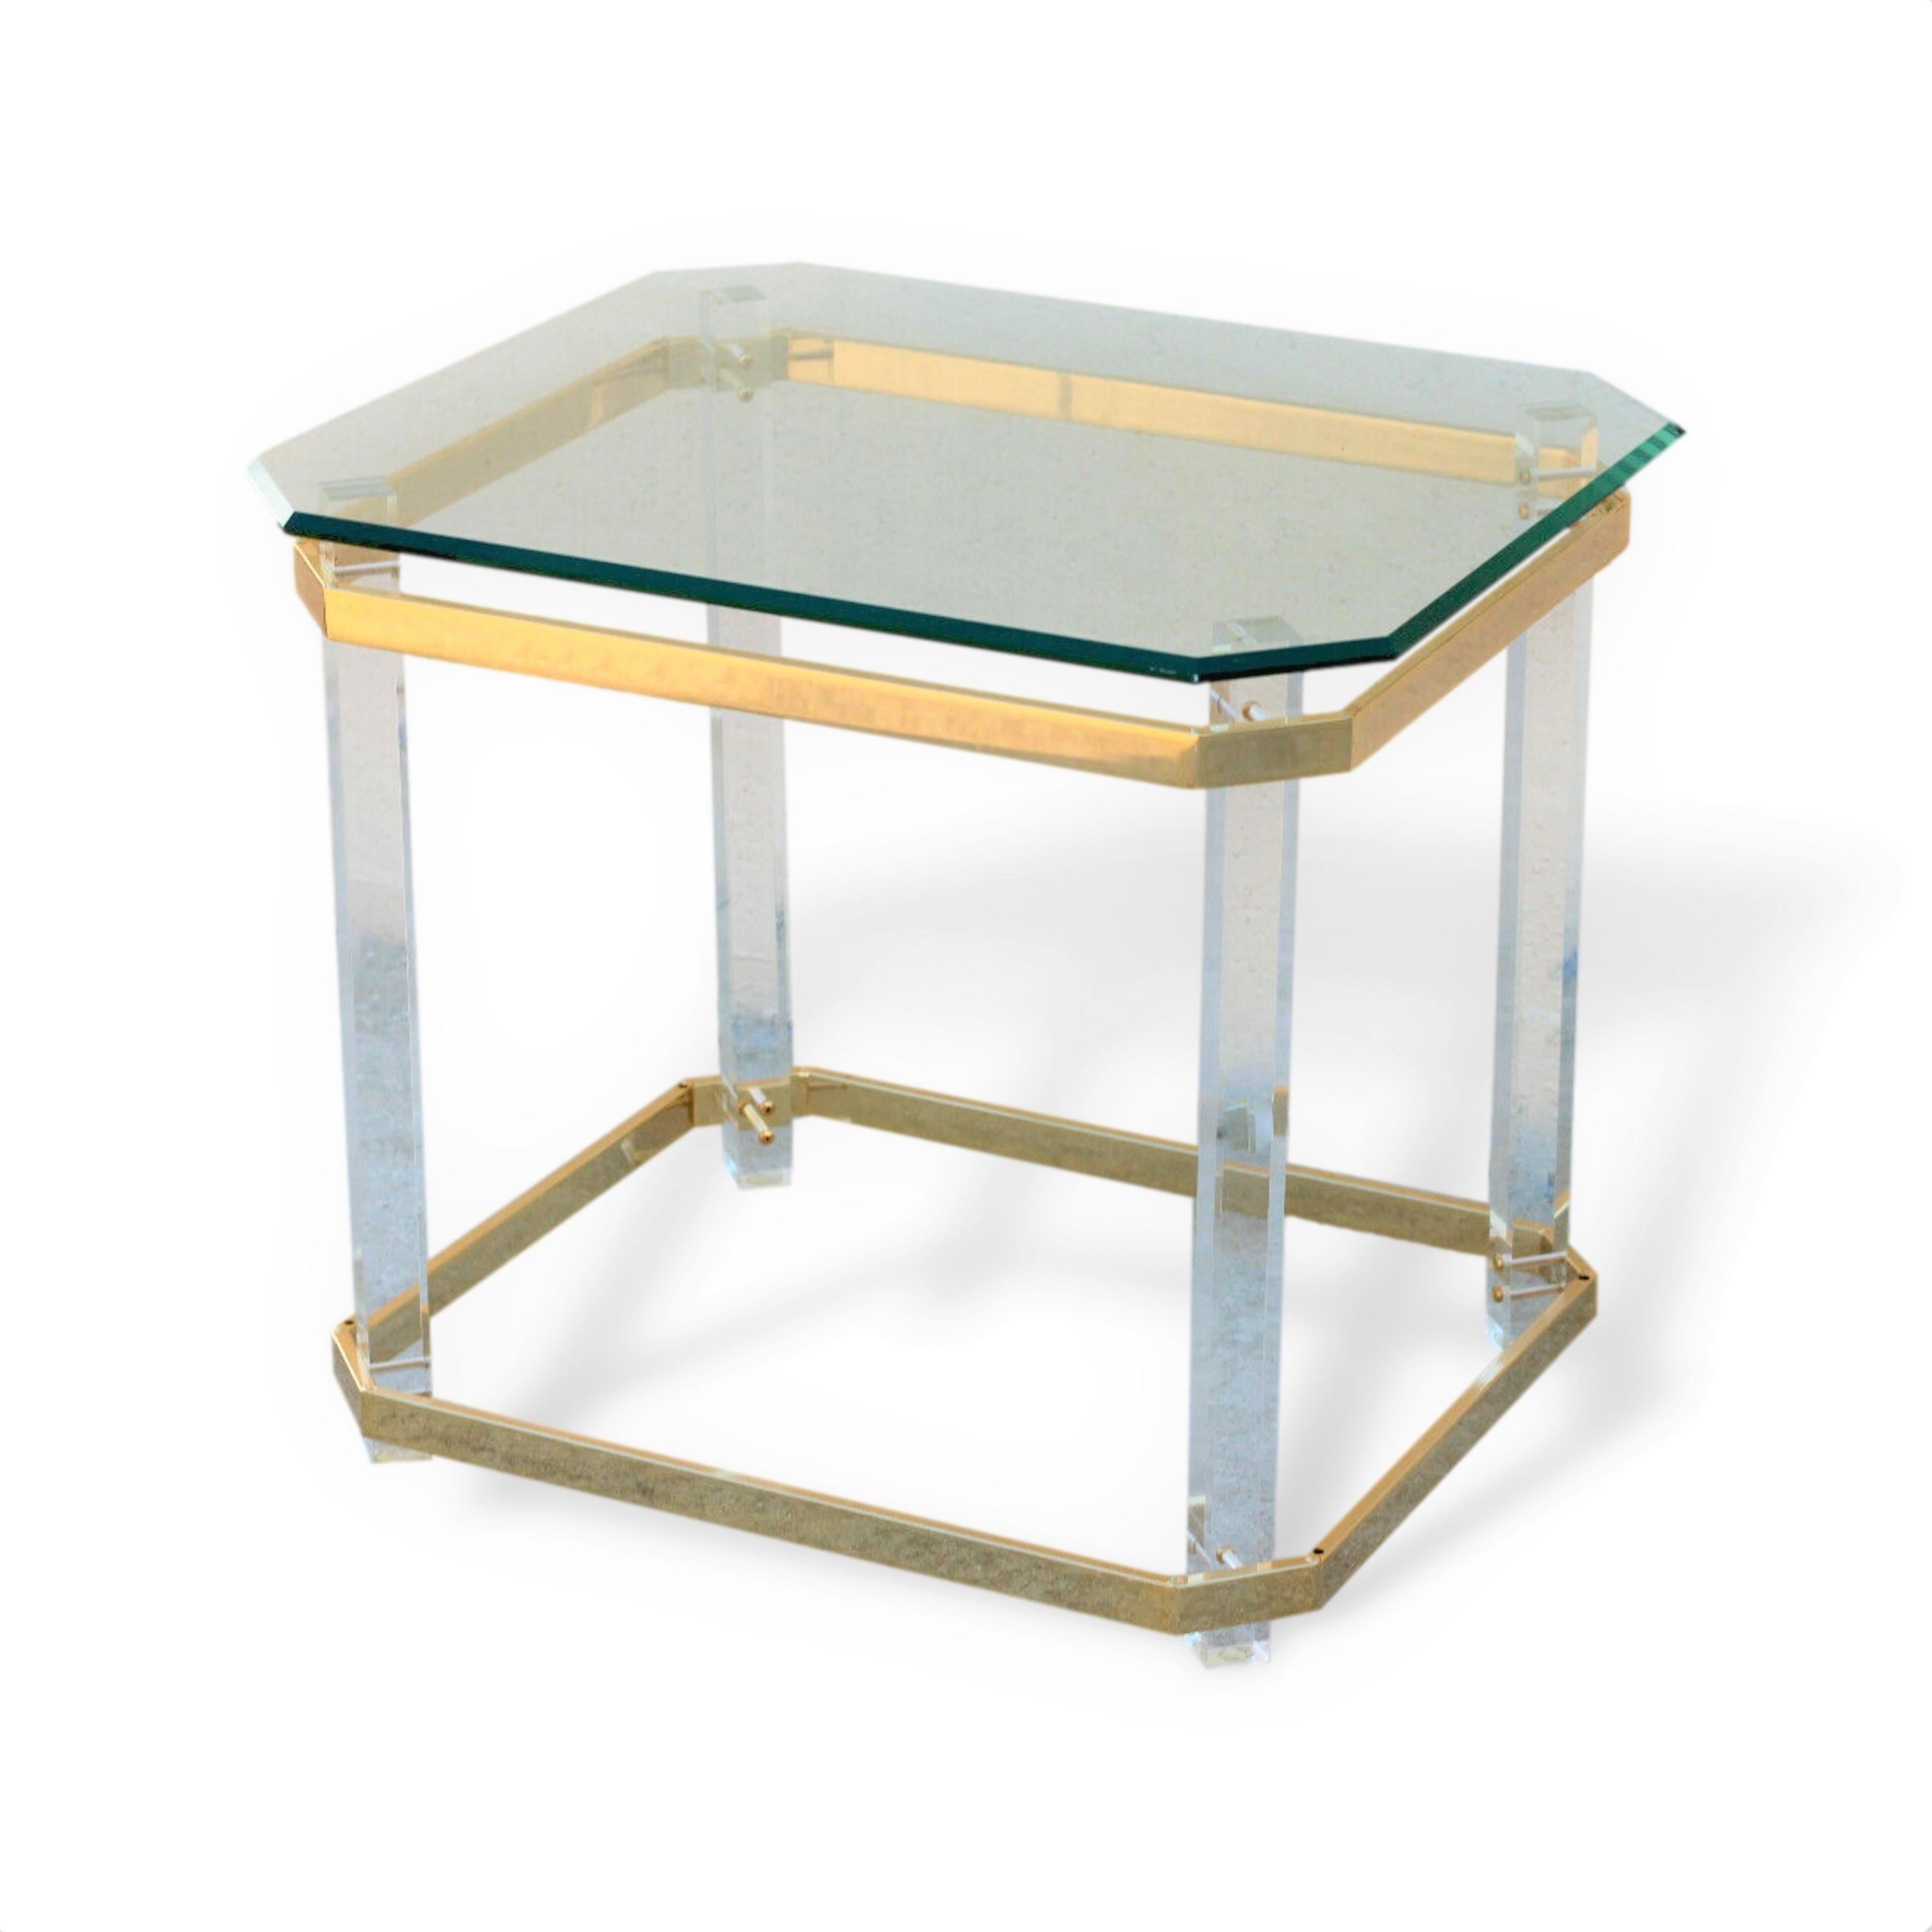 Pair of vintage 1970s lucite brass and glass side tables after Charles Hollis Jones in Hollywood Regency or Mid-Century Modern style.

Lucite has a natural transparency, providing a beautifully clean look, and it doesn’t add any visual clutter.